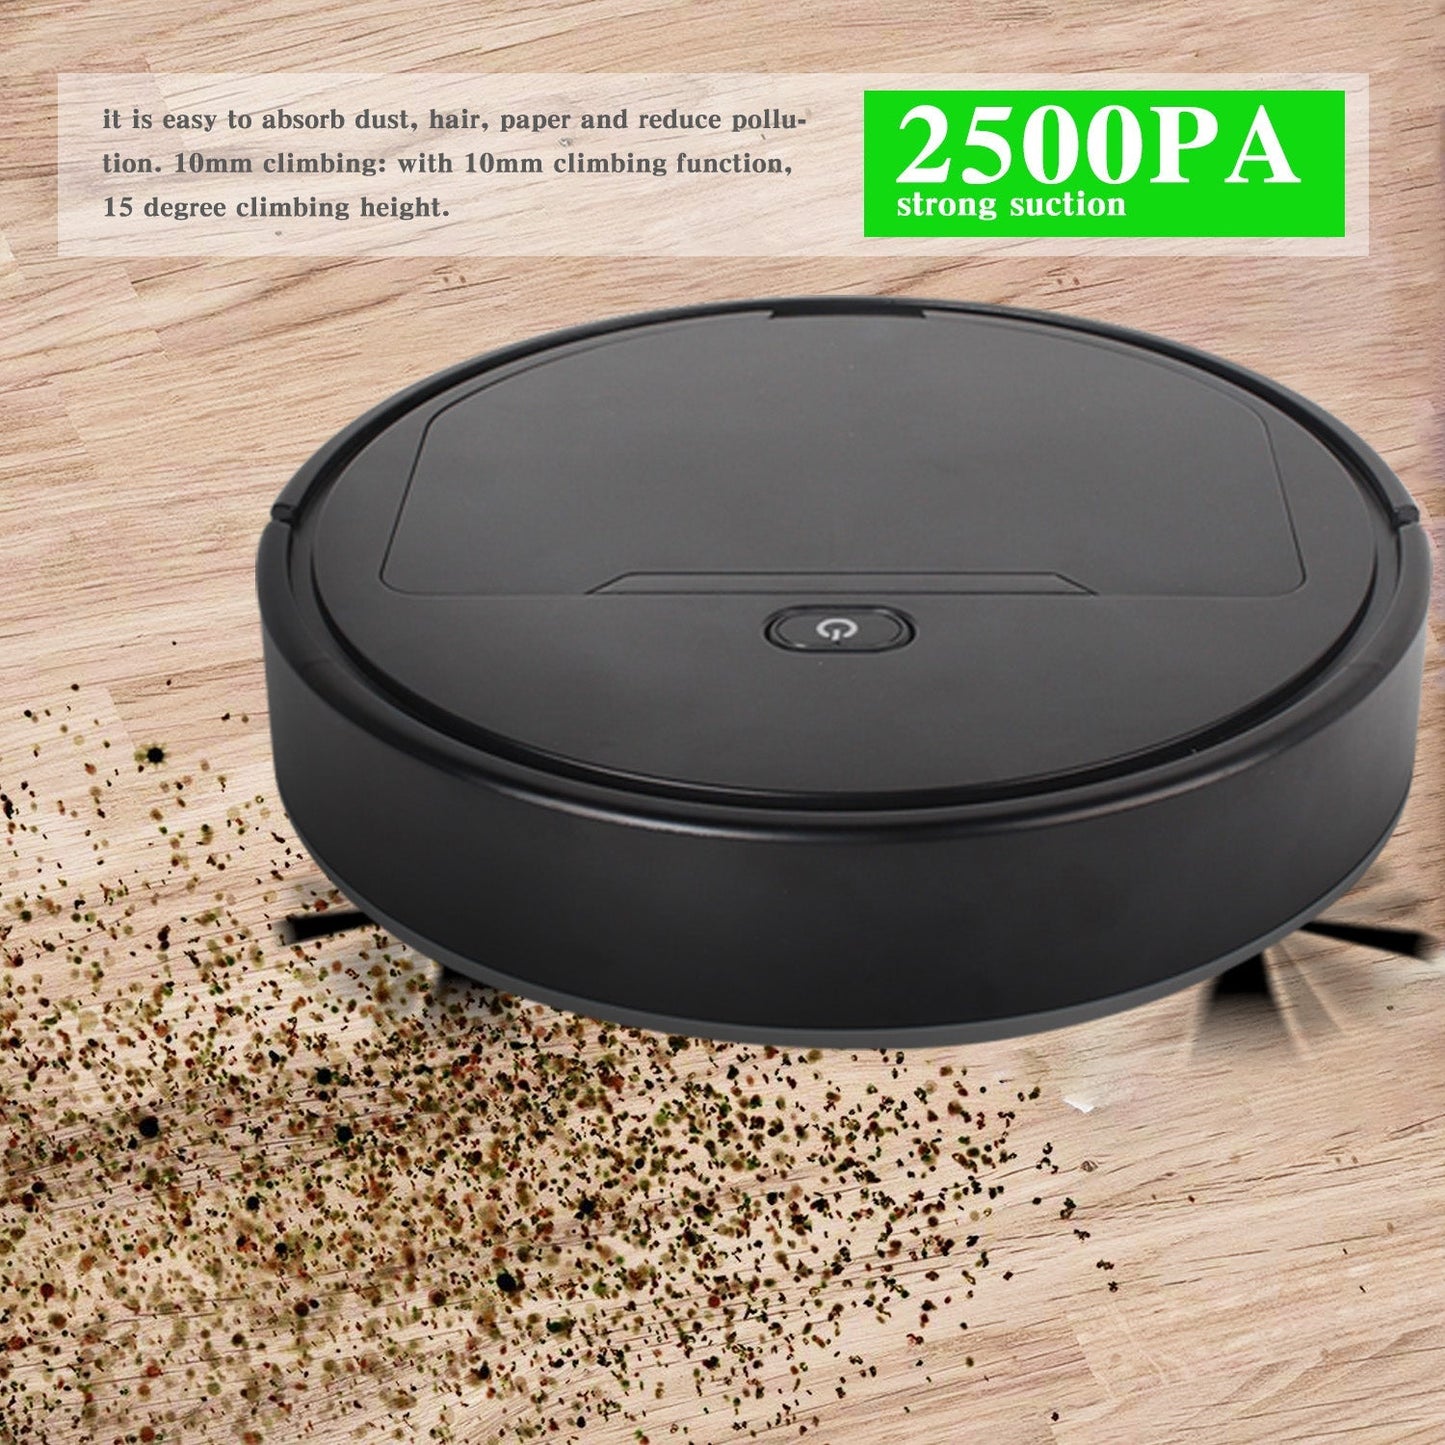 Factory Price 3 in 1 Sweeping Mopping Cleaning Floor USB Robot Vacuum Cleaner baby magazin 